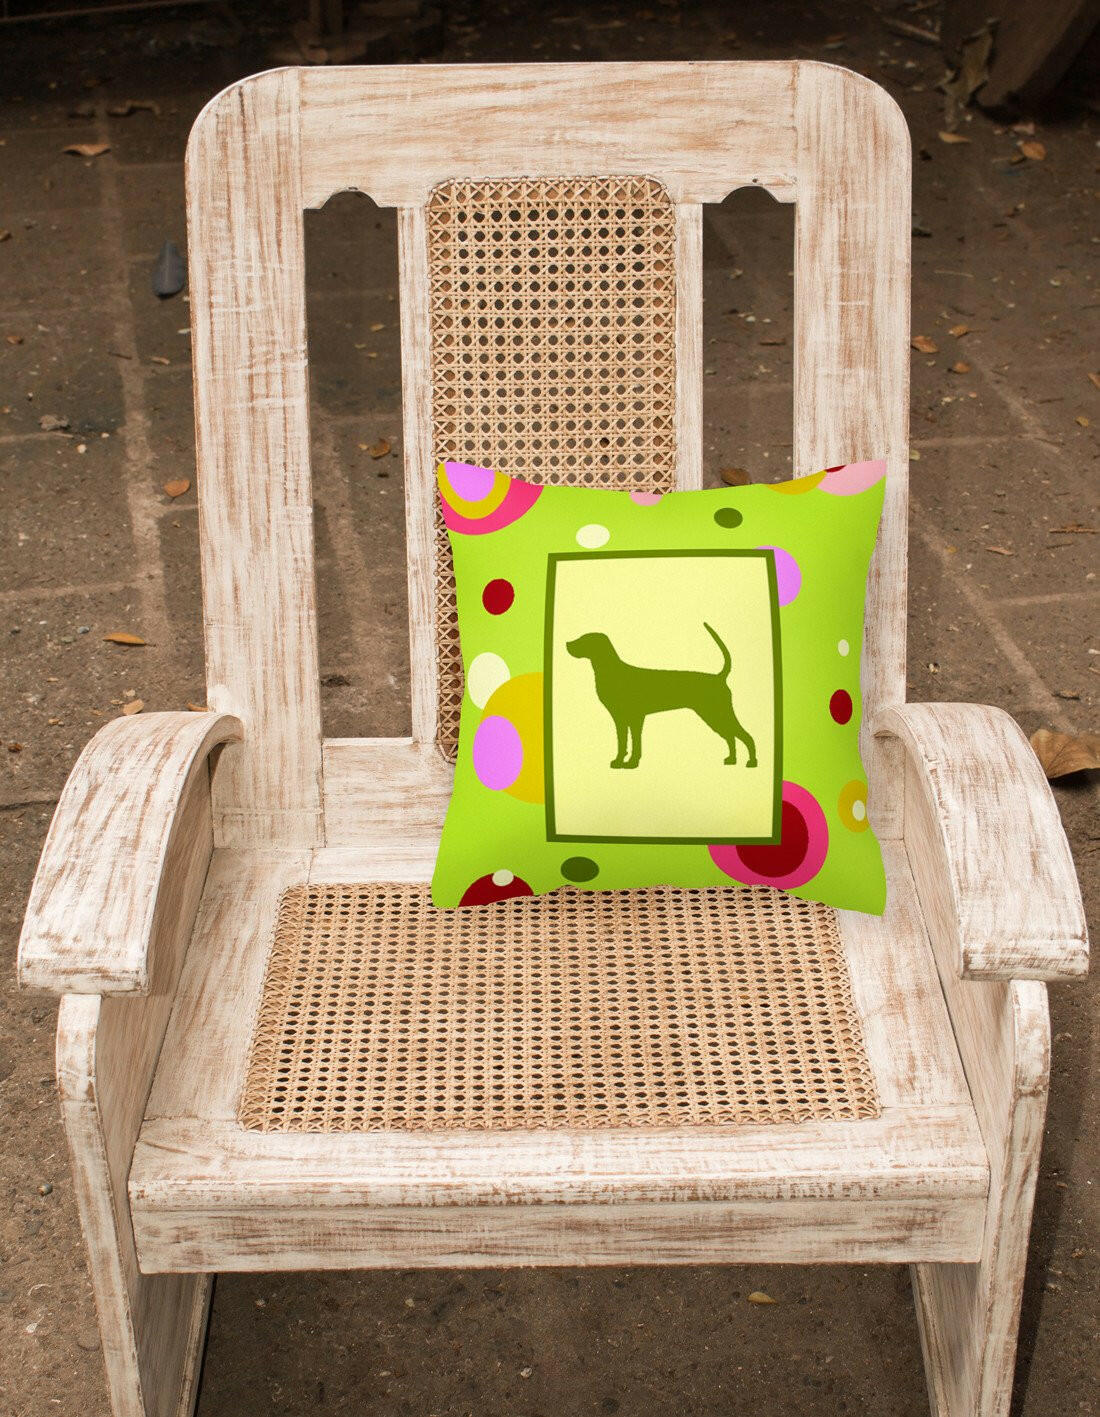 Lime Green Dots Coonhound Fabric Decorative Pillow CK1118PW1414 by Caroline's Treasures